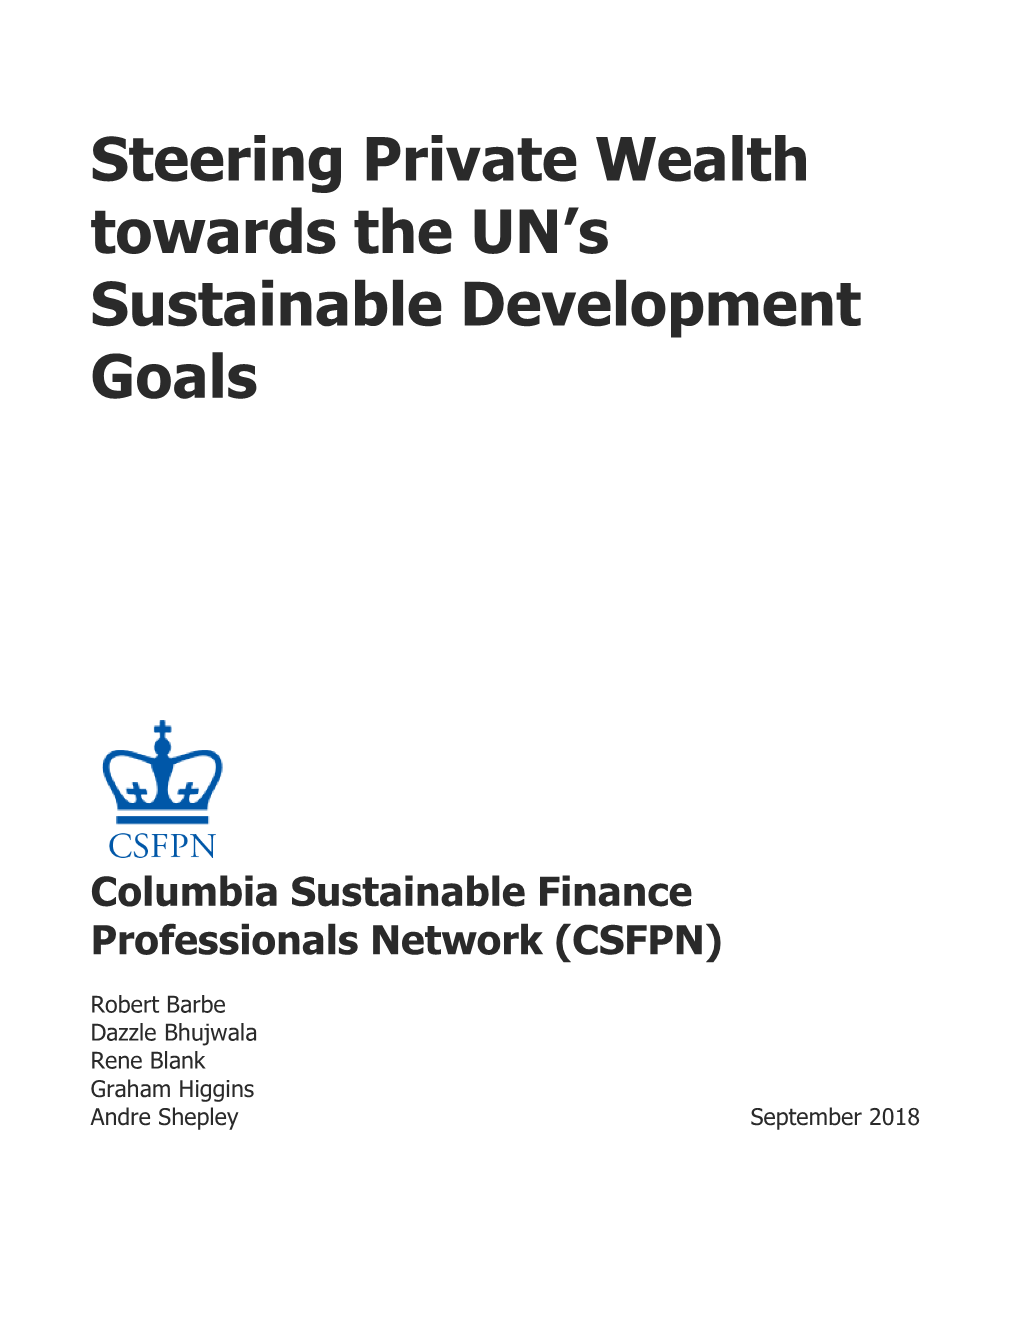 Steering Private Wealth Towards the UN's Sustainable Development Goals